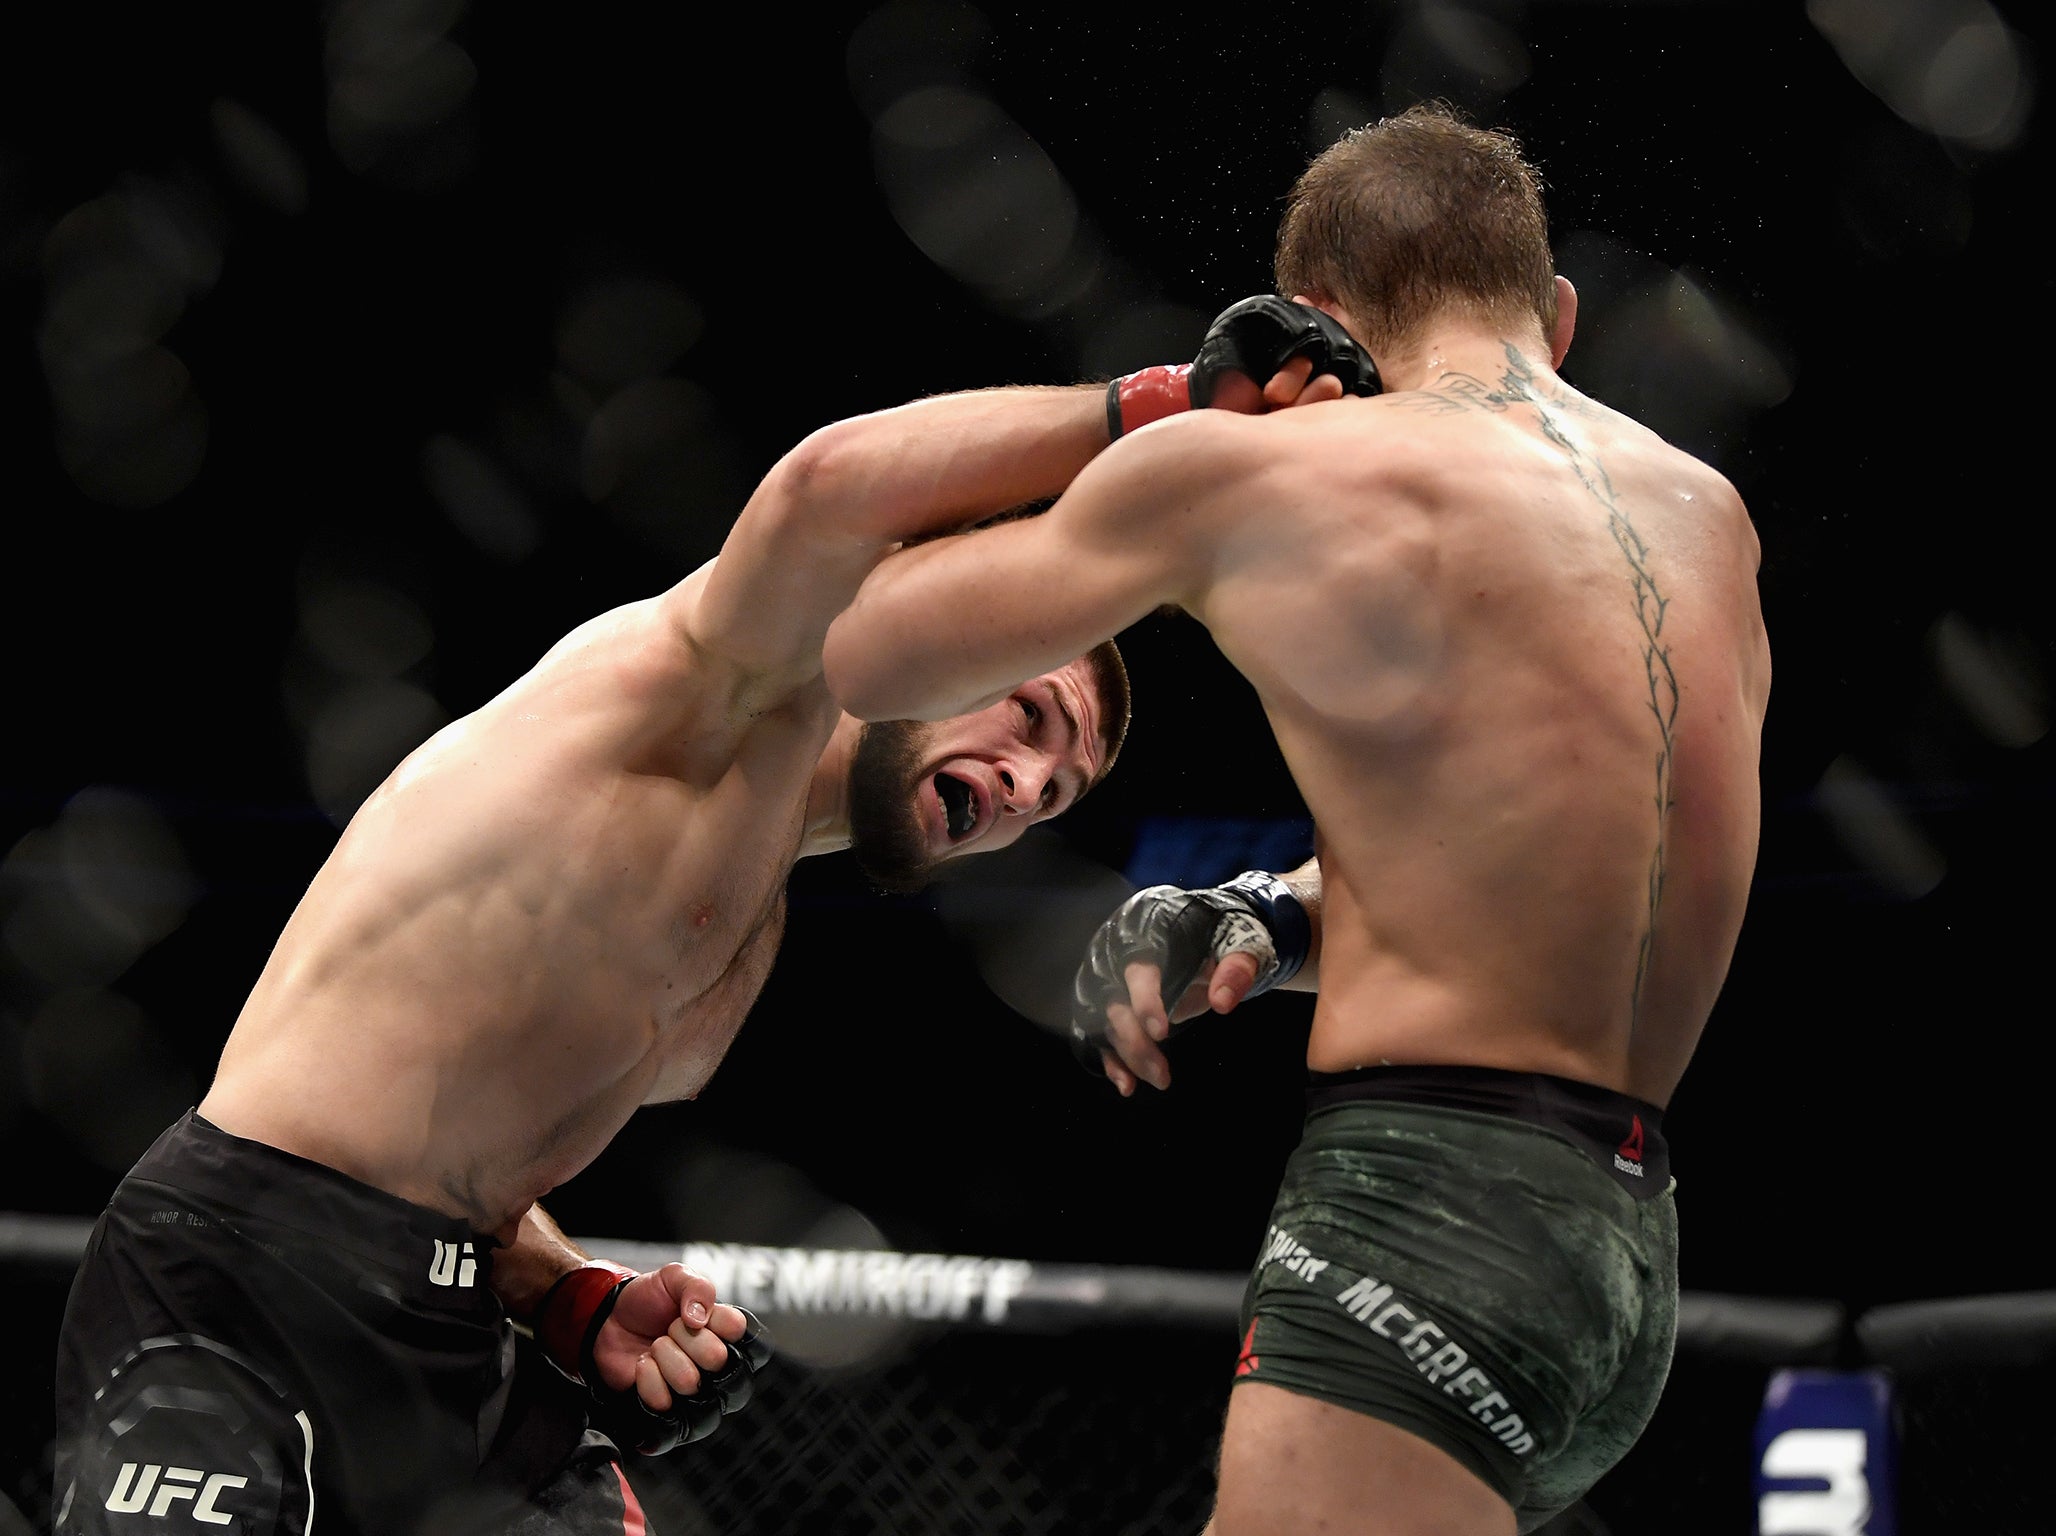 Khabib could yet be stripped of his title